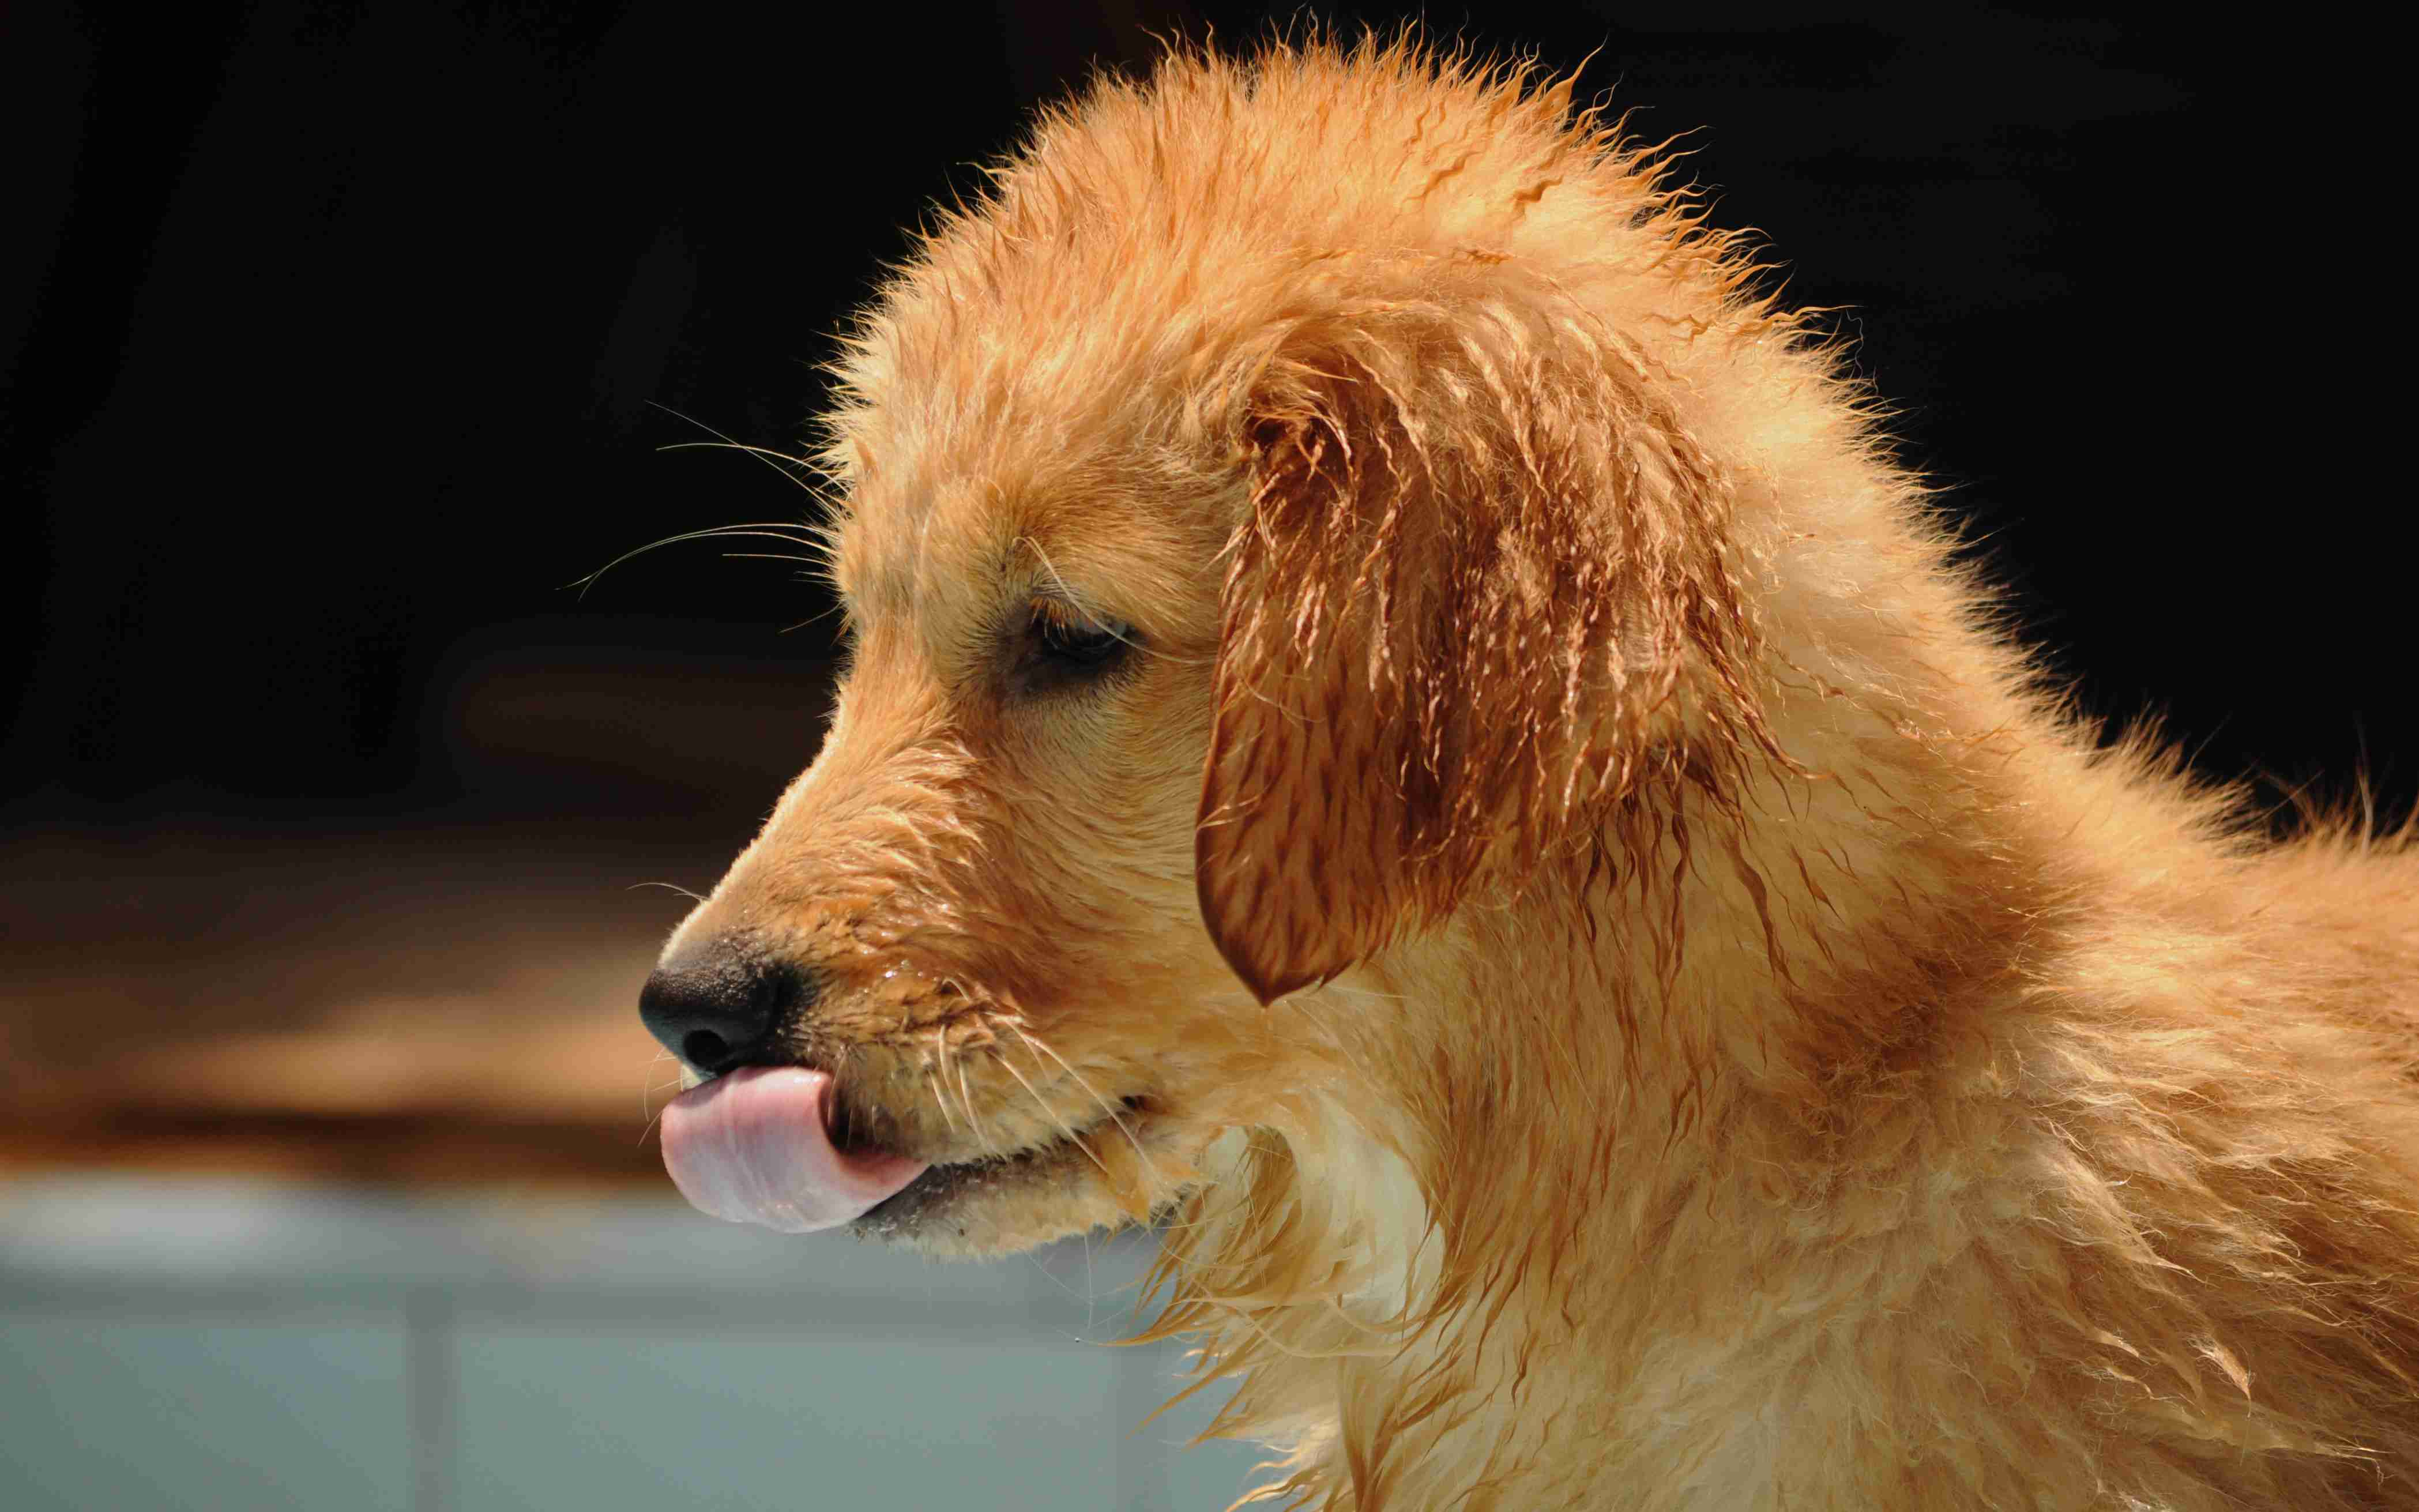 What type of food is best for a Golden Retriever's overall health?